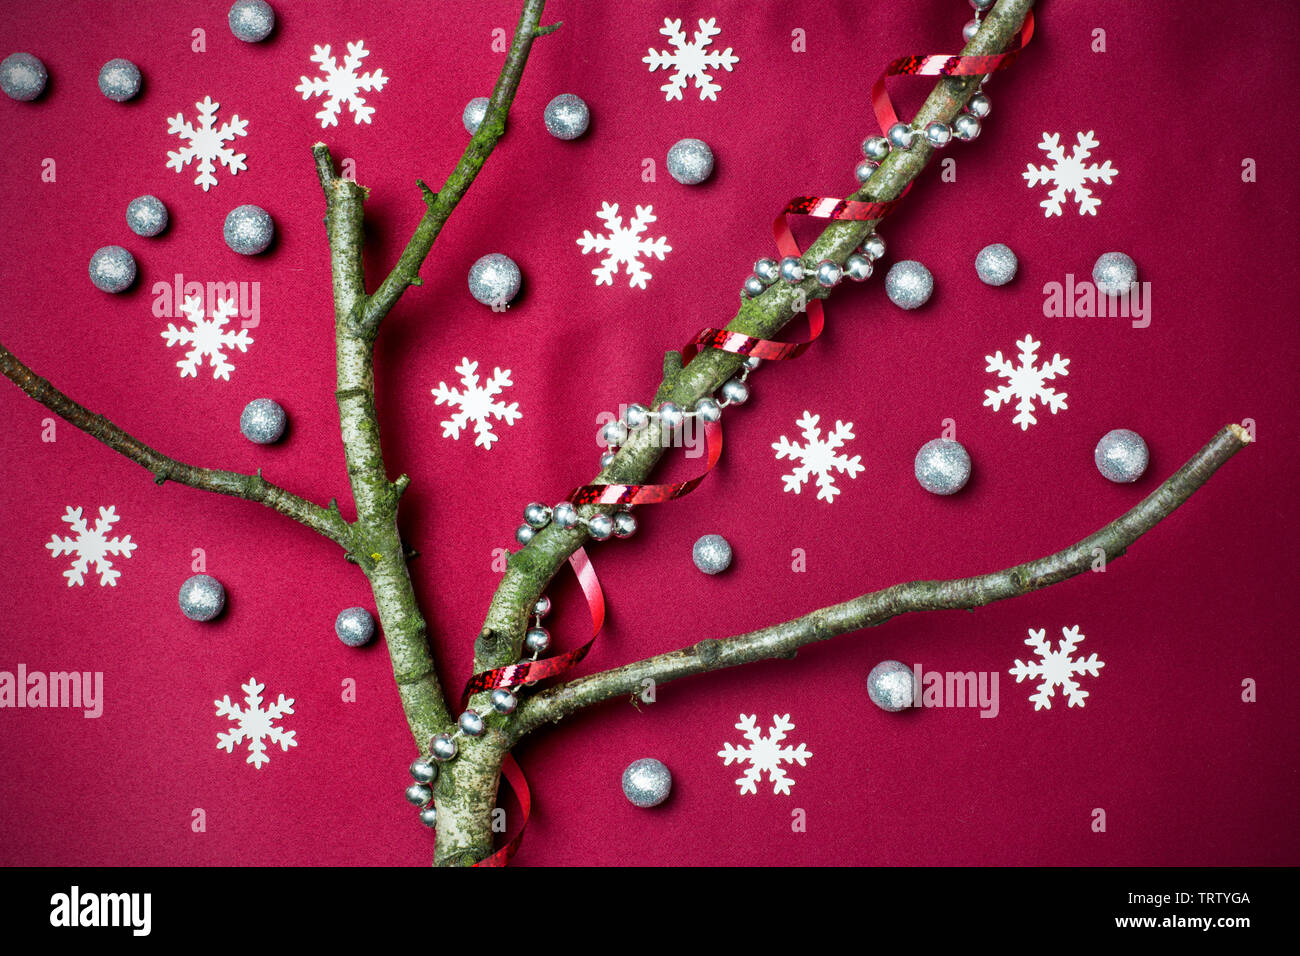 Christmas tree concept with leafless tree branches, snow flakes, glitter globules, red ribbon and bead chain on red background Stock Photo